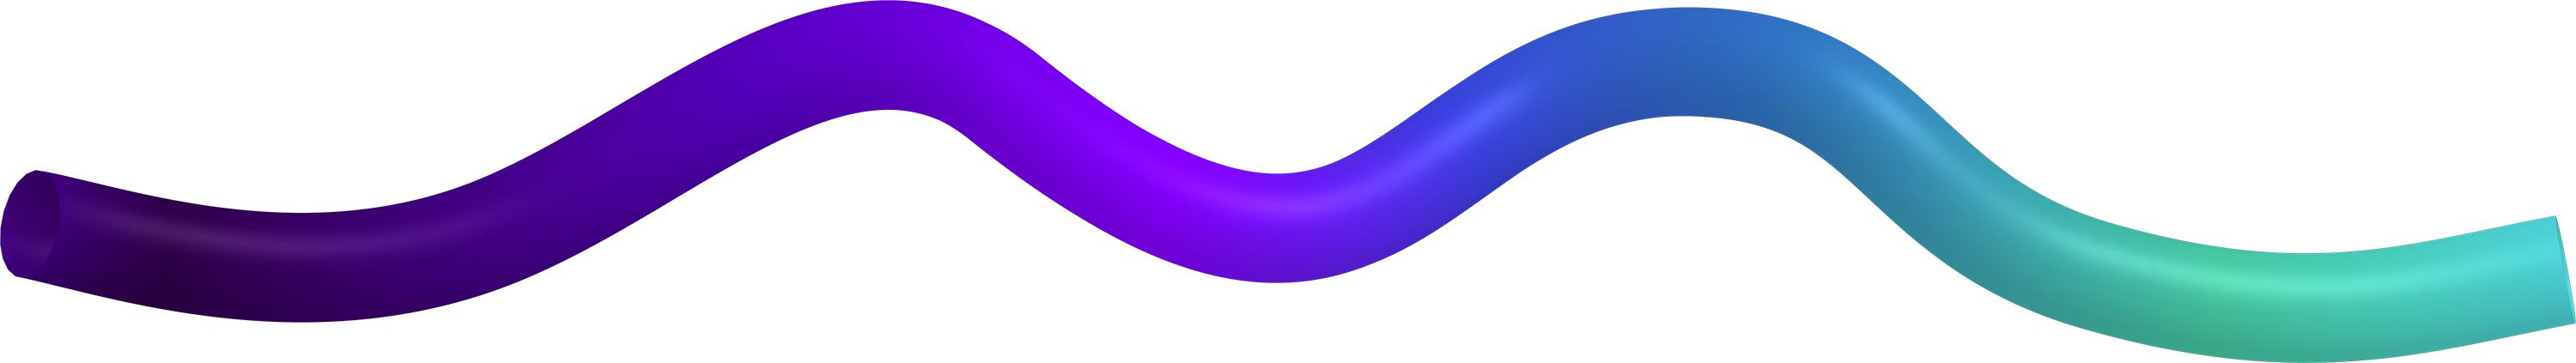 squiggly line with a purple to teal gradient representing the process path